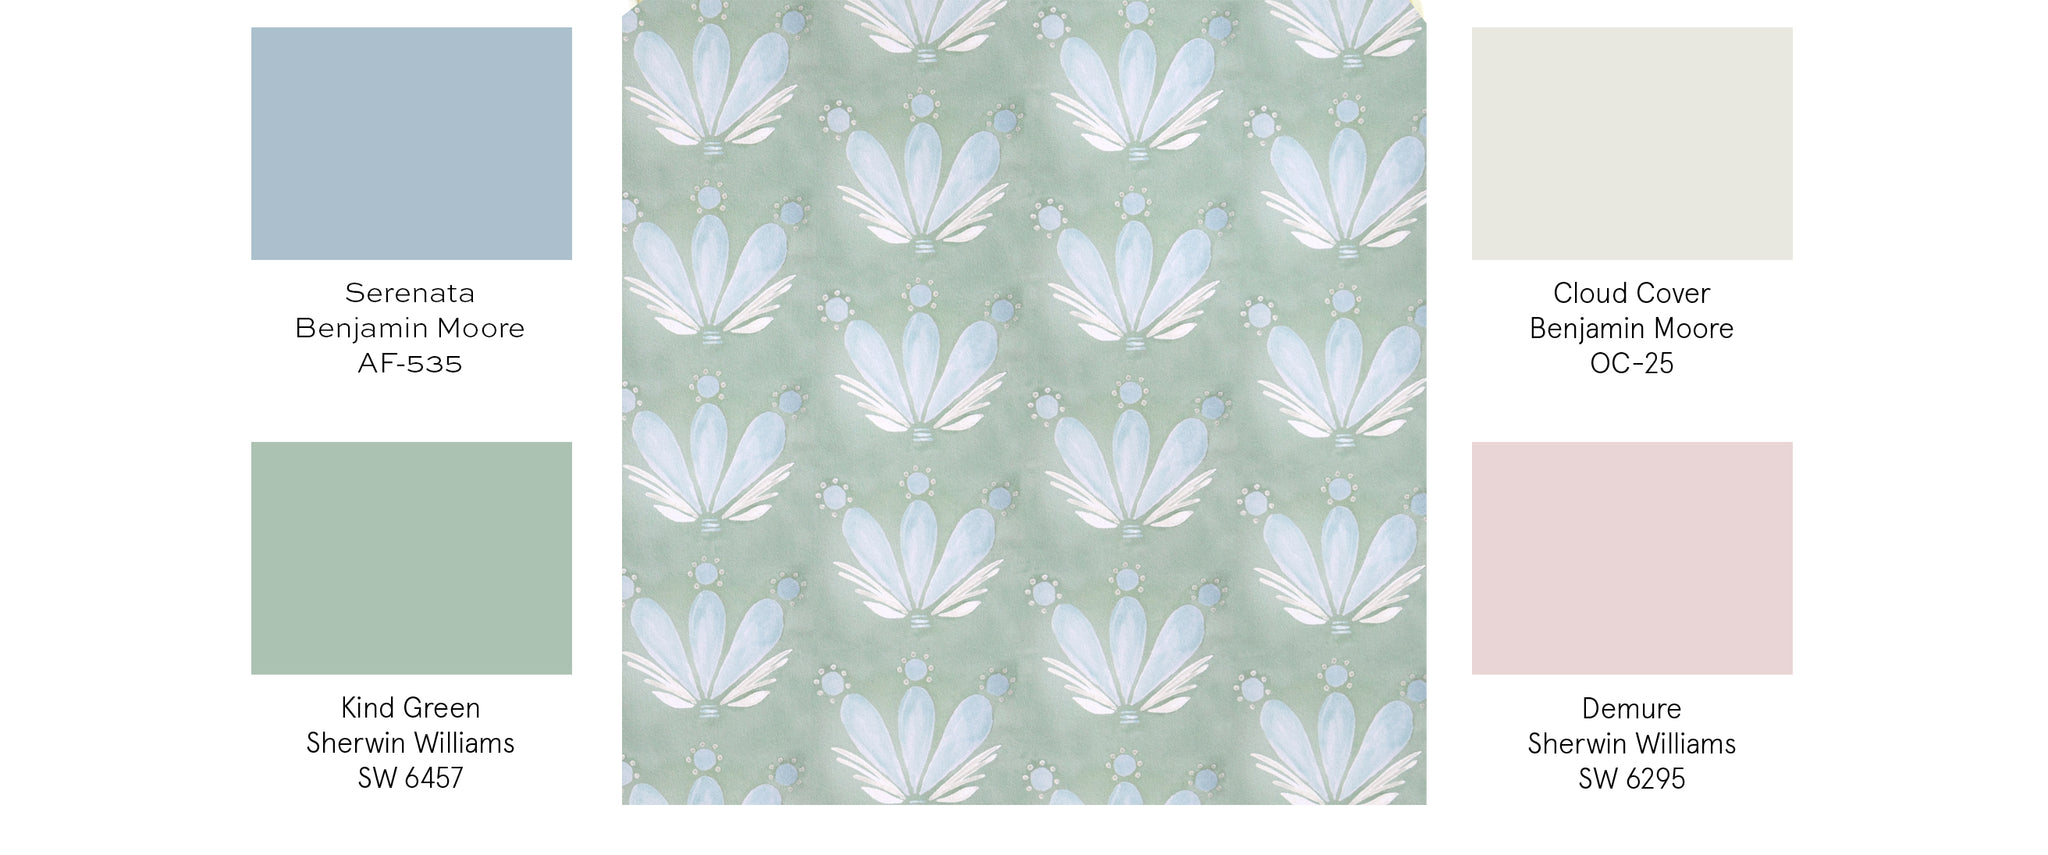 Paint guide for blue and green drop repeat floral wallpaper